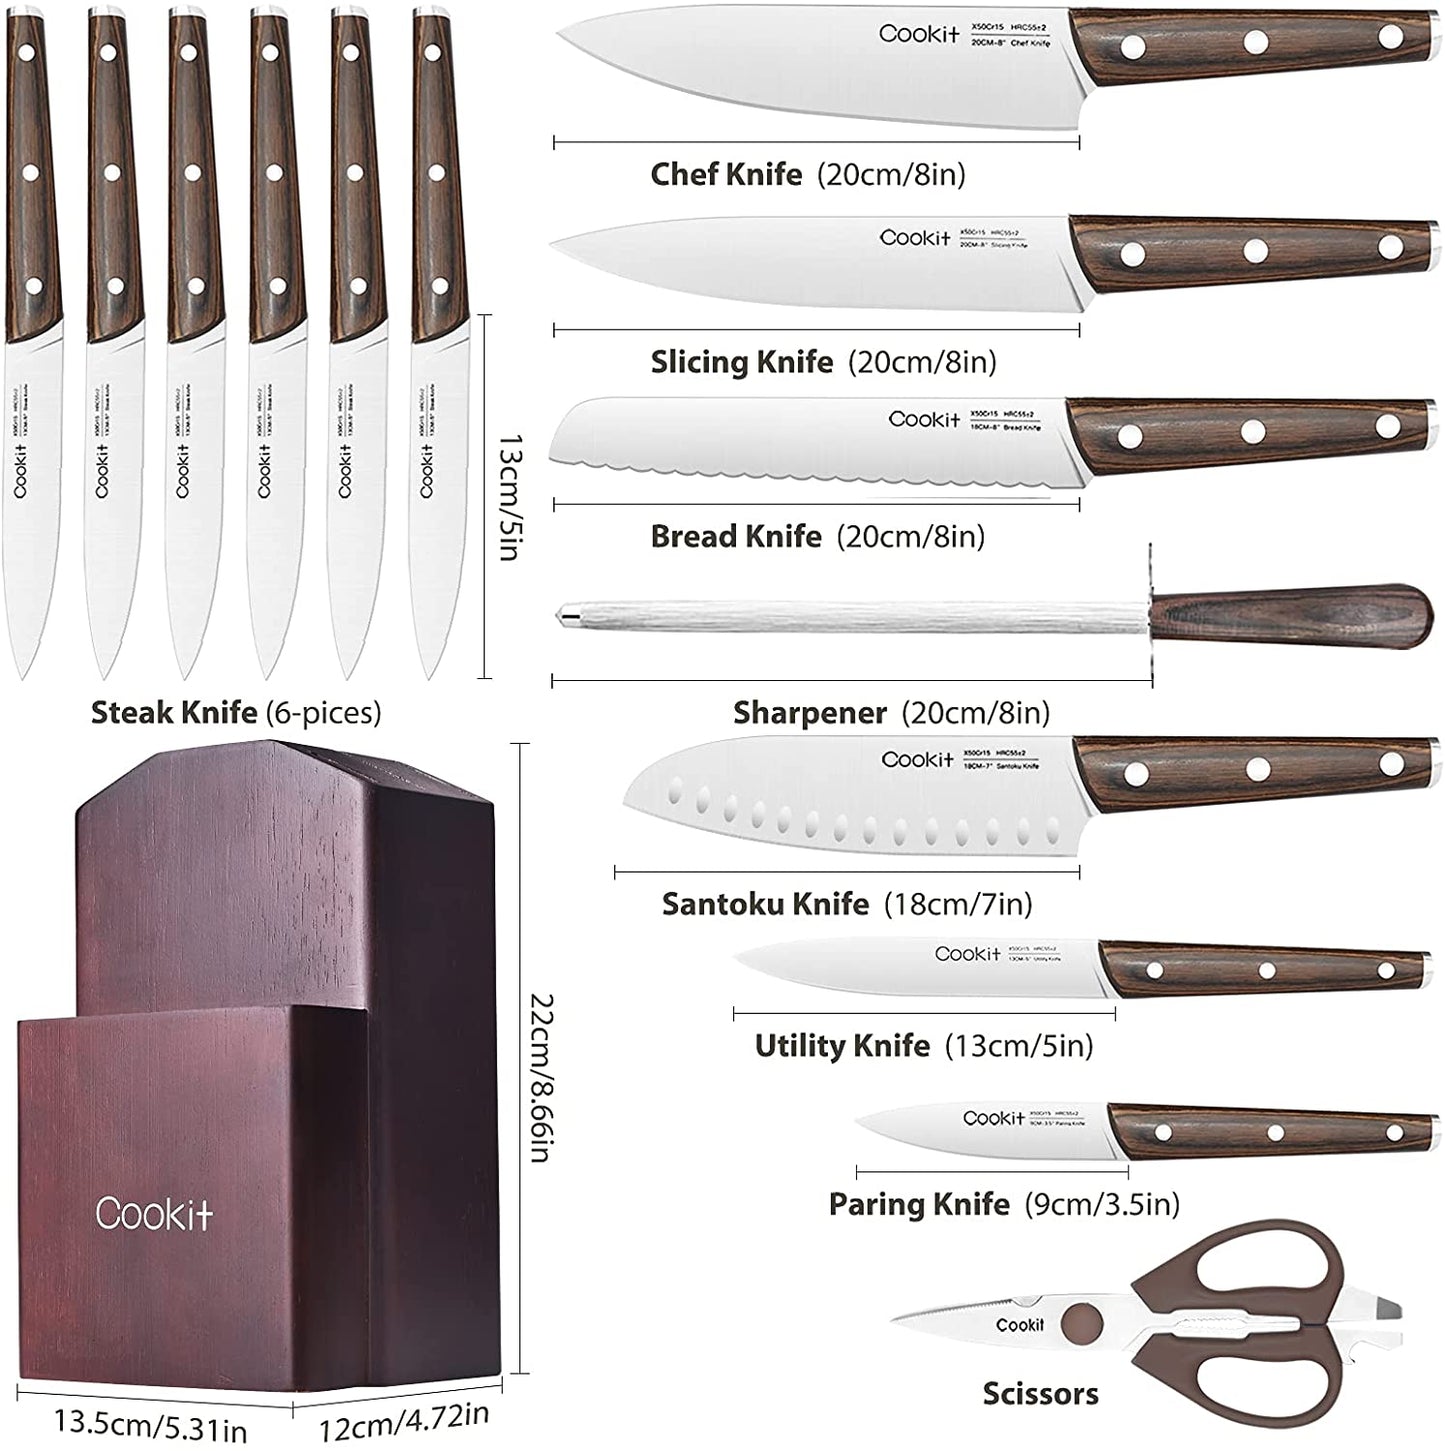 Kitchen Knife Sets, 15 Piece Knife Sets with Block for Kitchen Chef Knife Stainless Steel Knives Set Serrated Steak Knives with Manual Sharpener Knife Amazon Platform Banned